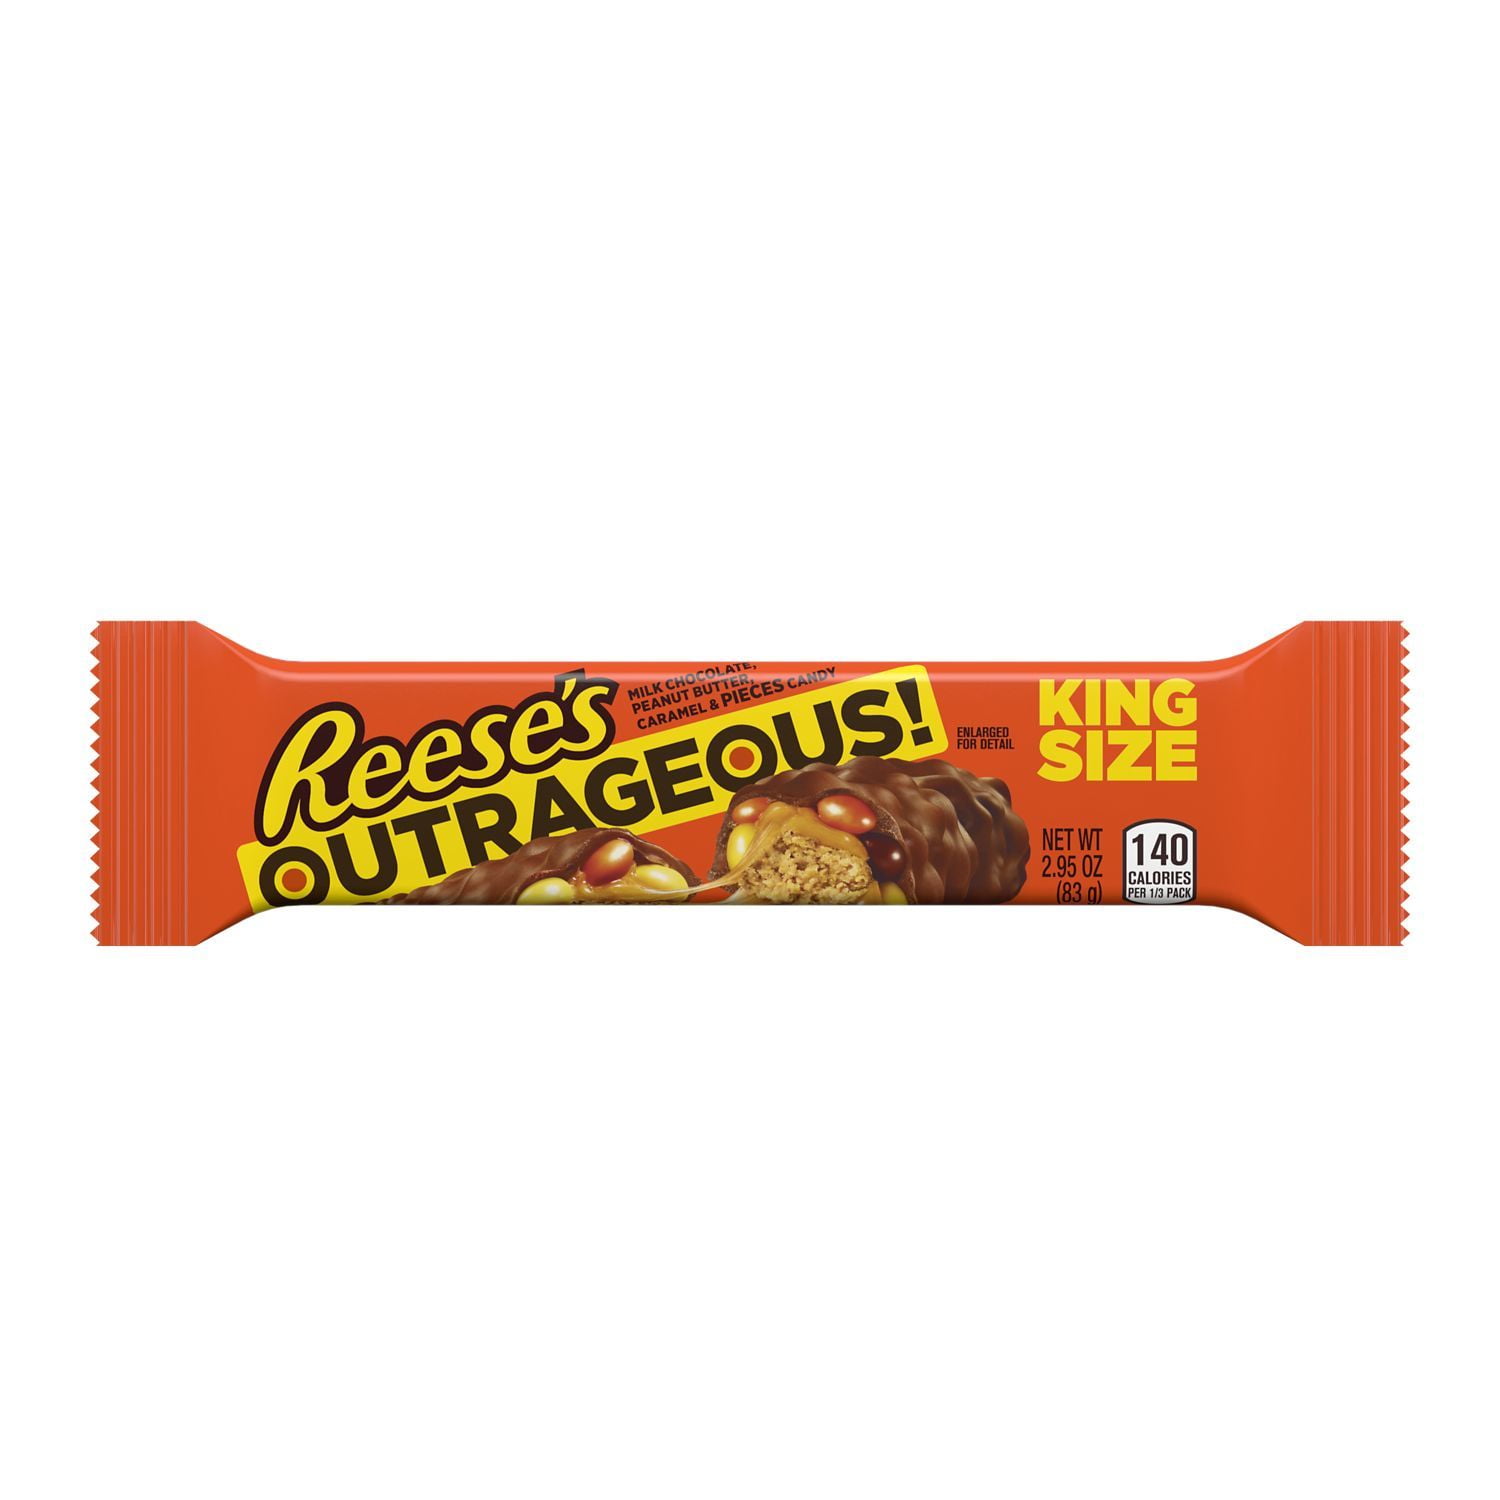 Reese's Outrageious, Chocolate Peanut Butter and Caramel, King Size 2.95 oz Bar